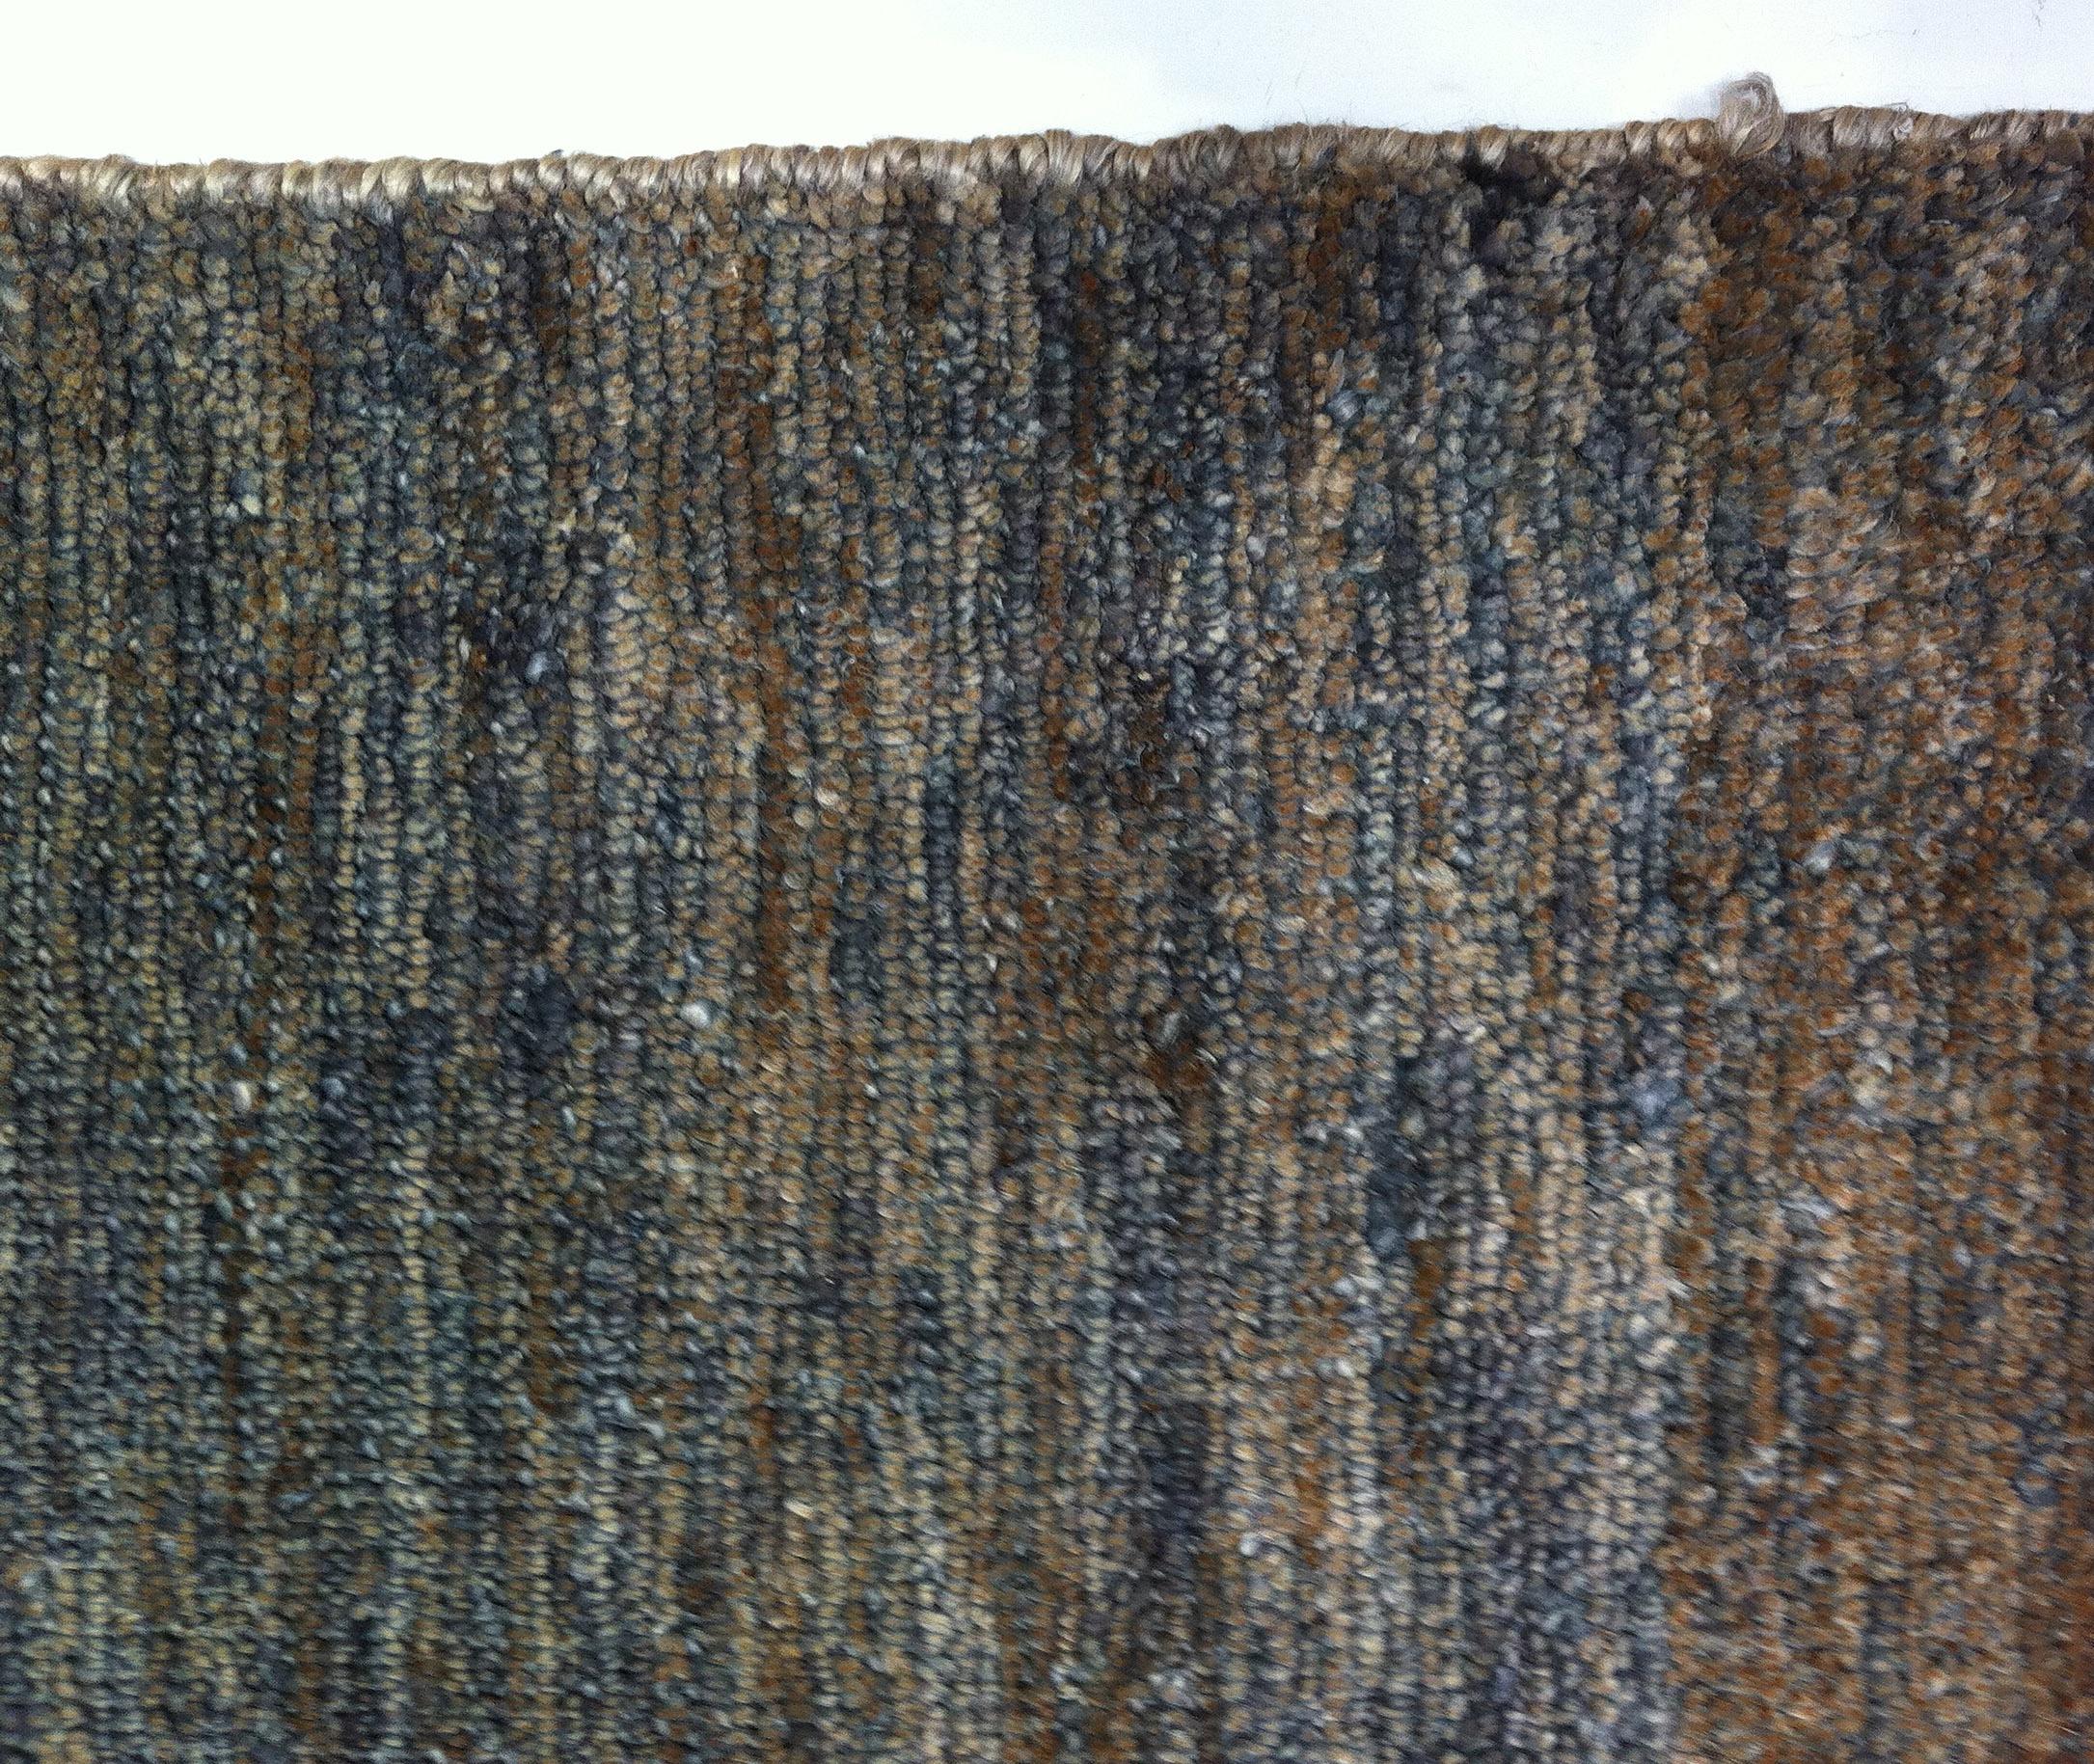 A wonderfully soft jute rug in the colors of well-worn denim and leather. A contemporary rug for the rustic cabin or urban space that features natural finishes. Best suited for low to medium traffic areas. 

Handmade in India using natural vegetal